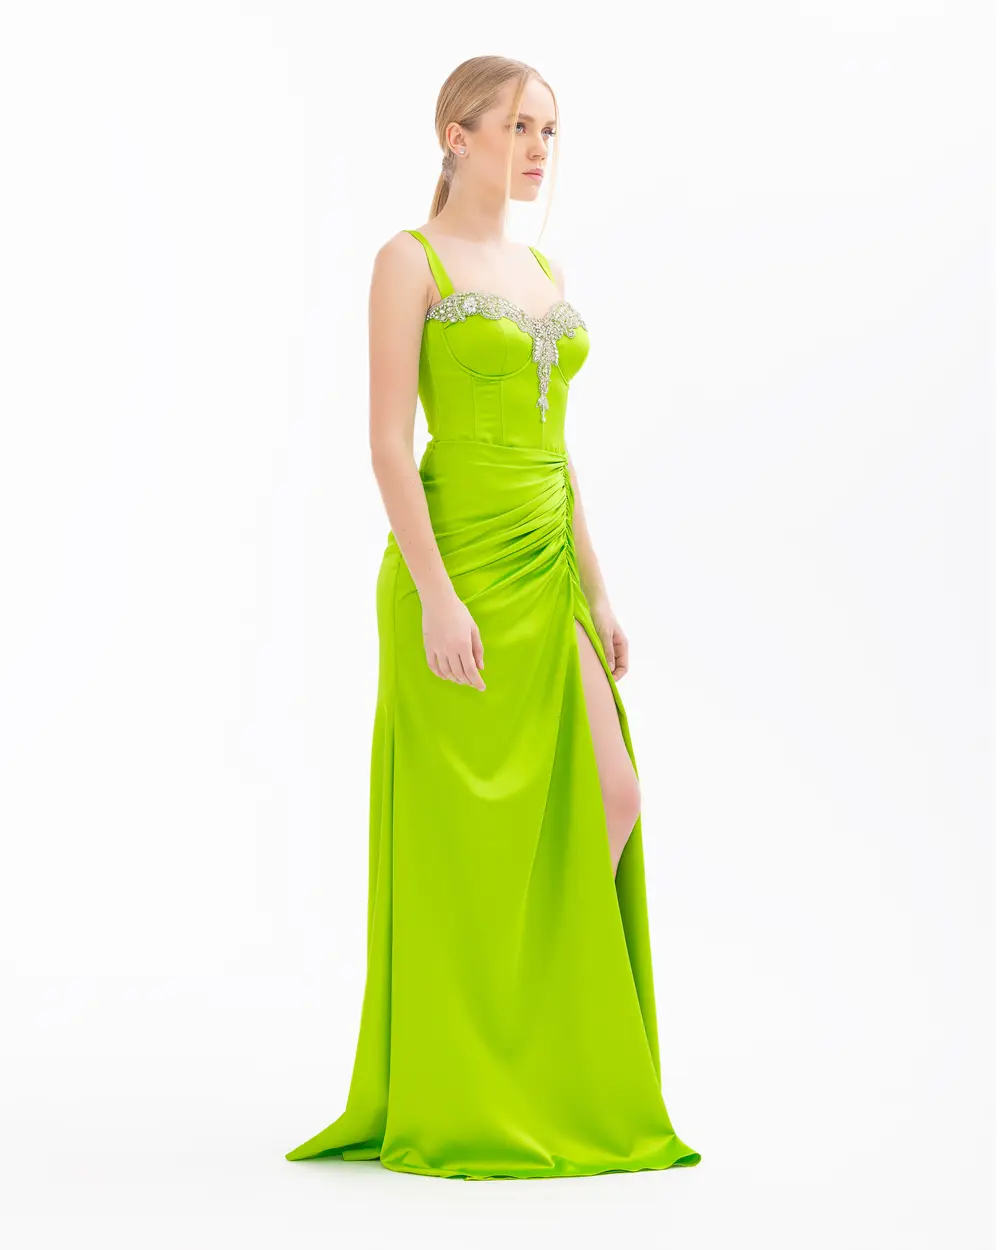 Satin Draped Evening Dress with Breast Cups